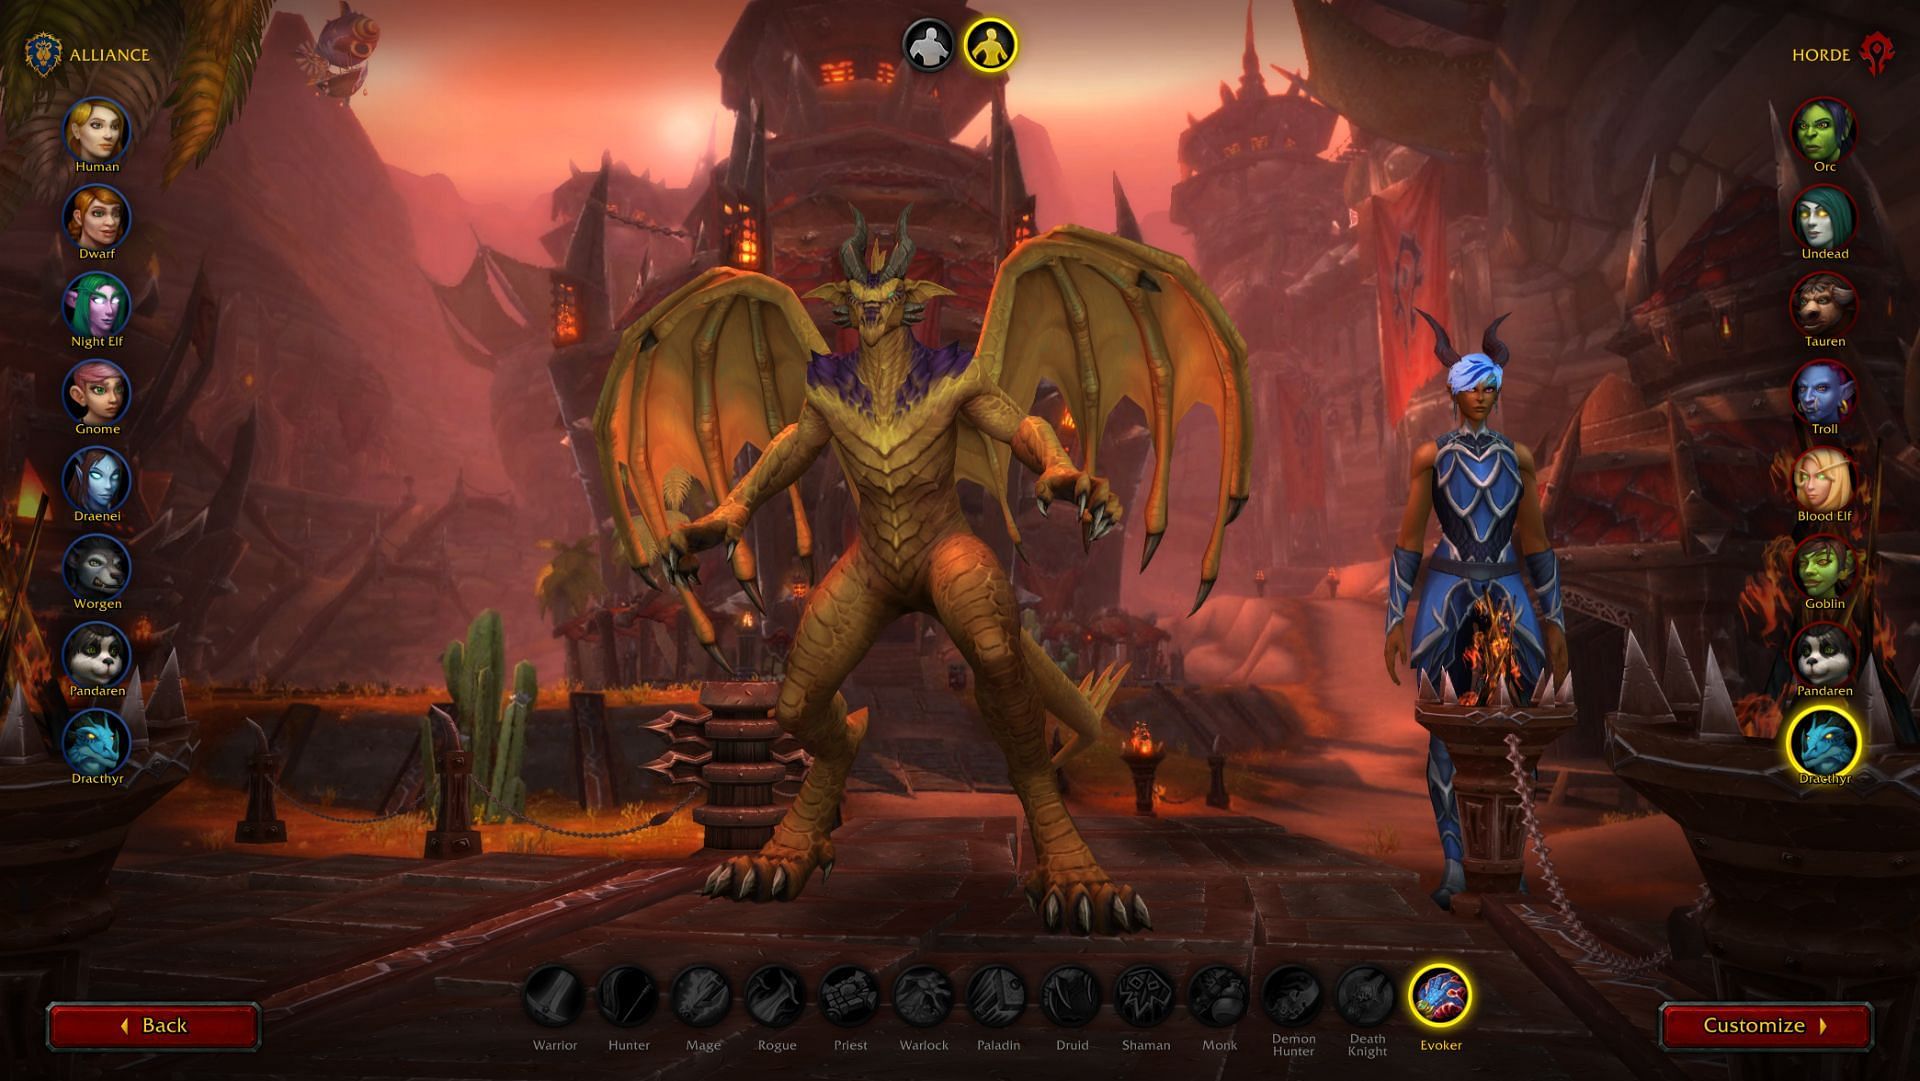 World of Warcraft: Dragonflight&#039;s alpha testing has begun, letting players experience the Azure Span zone (Image via Blizzard Entertainment)